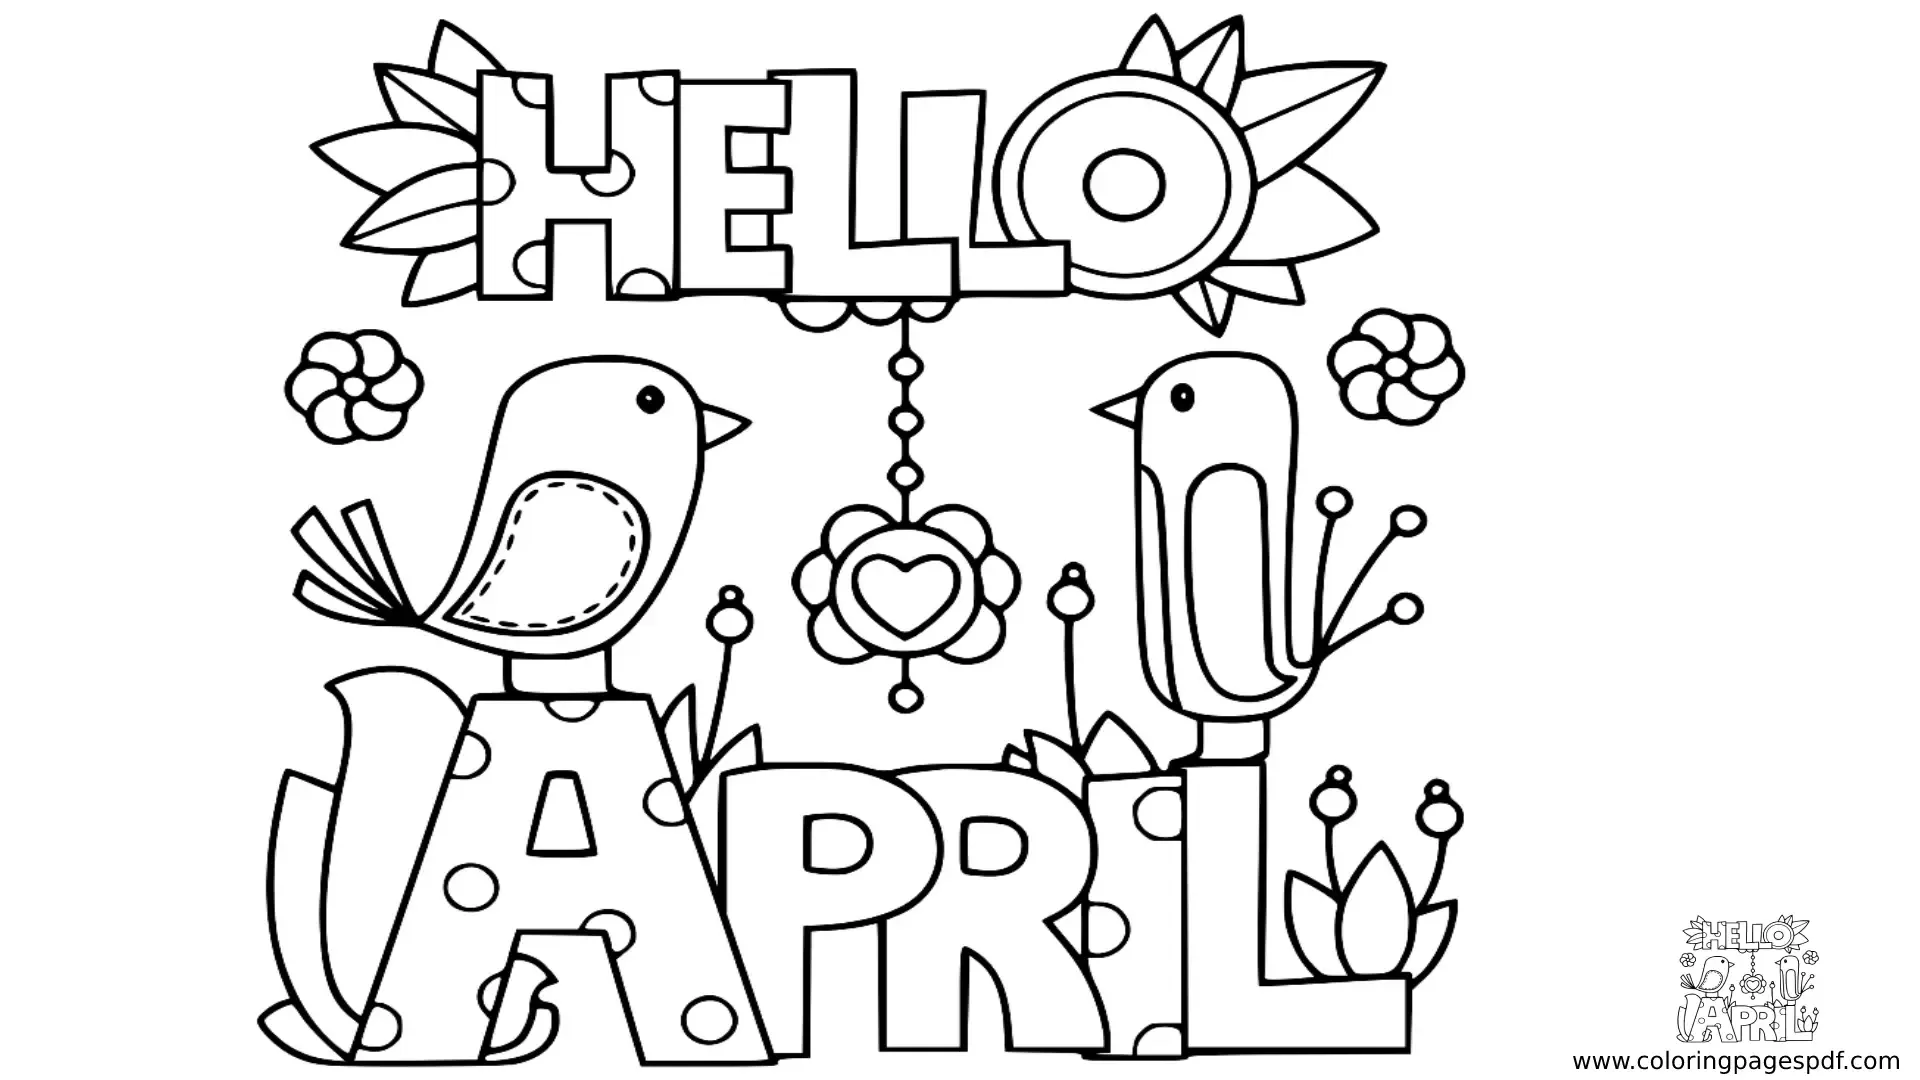 Coloring Pages Of Hello April